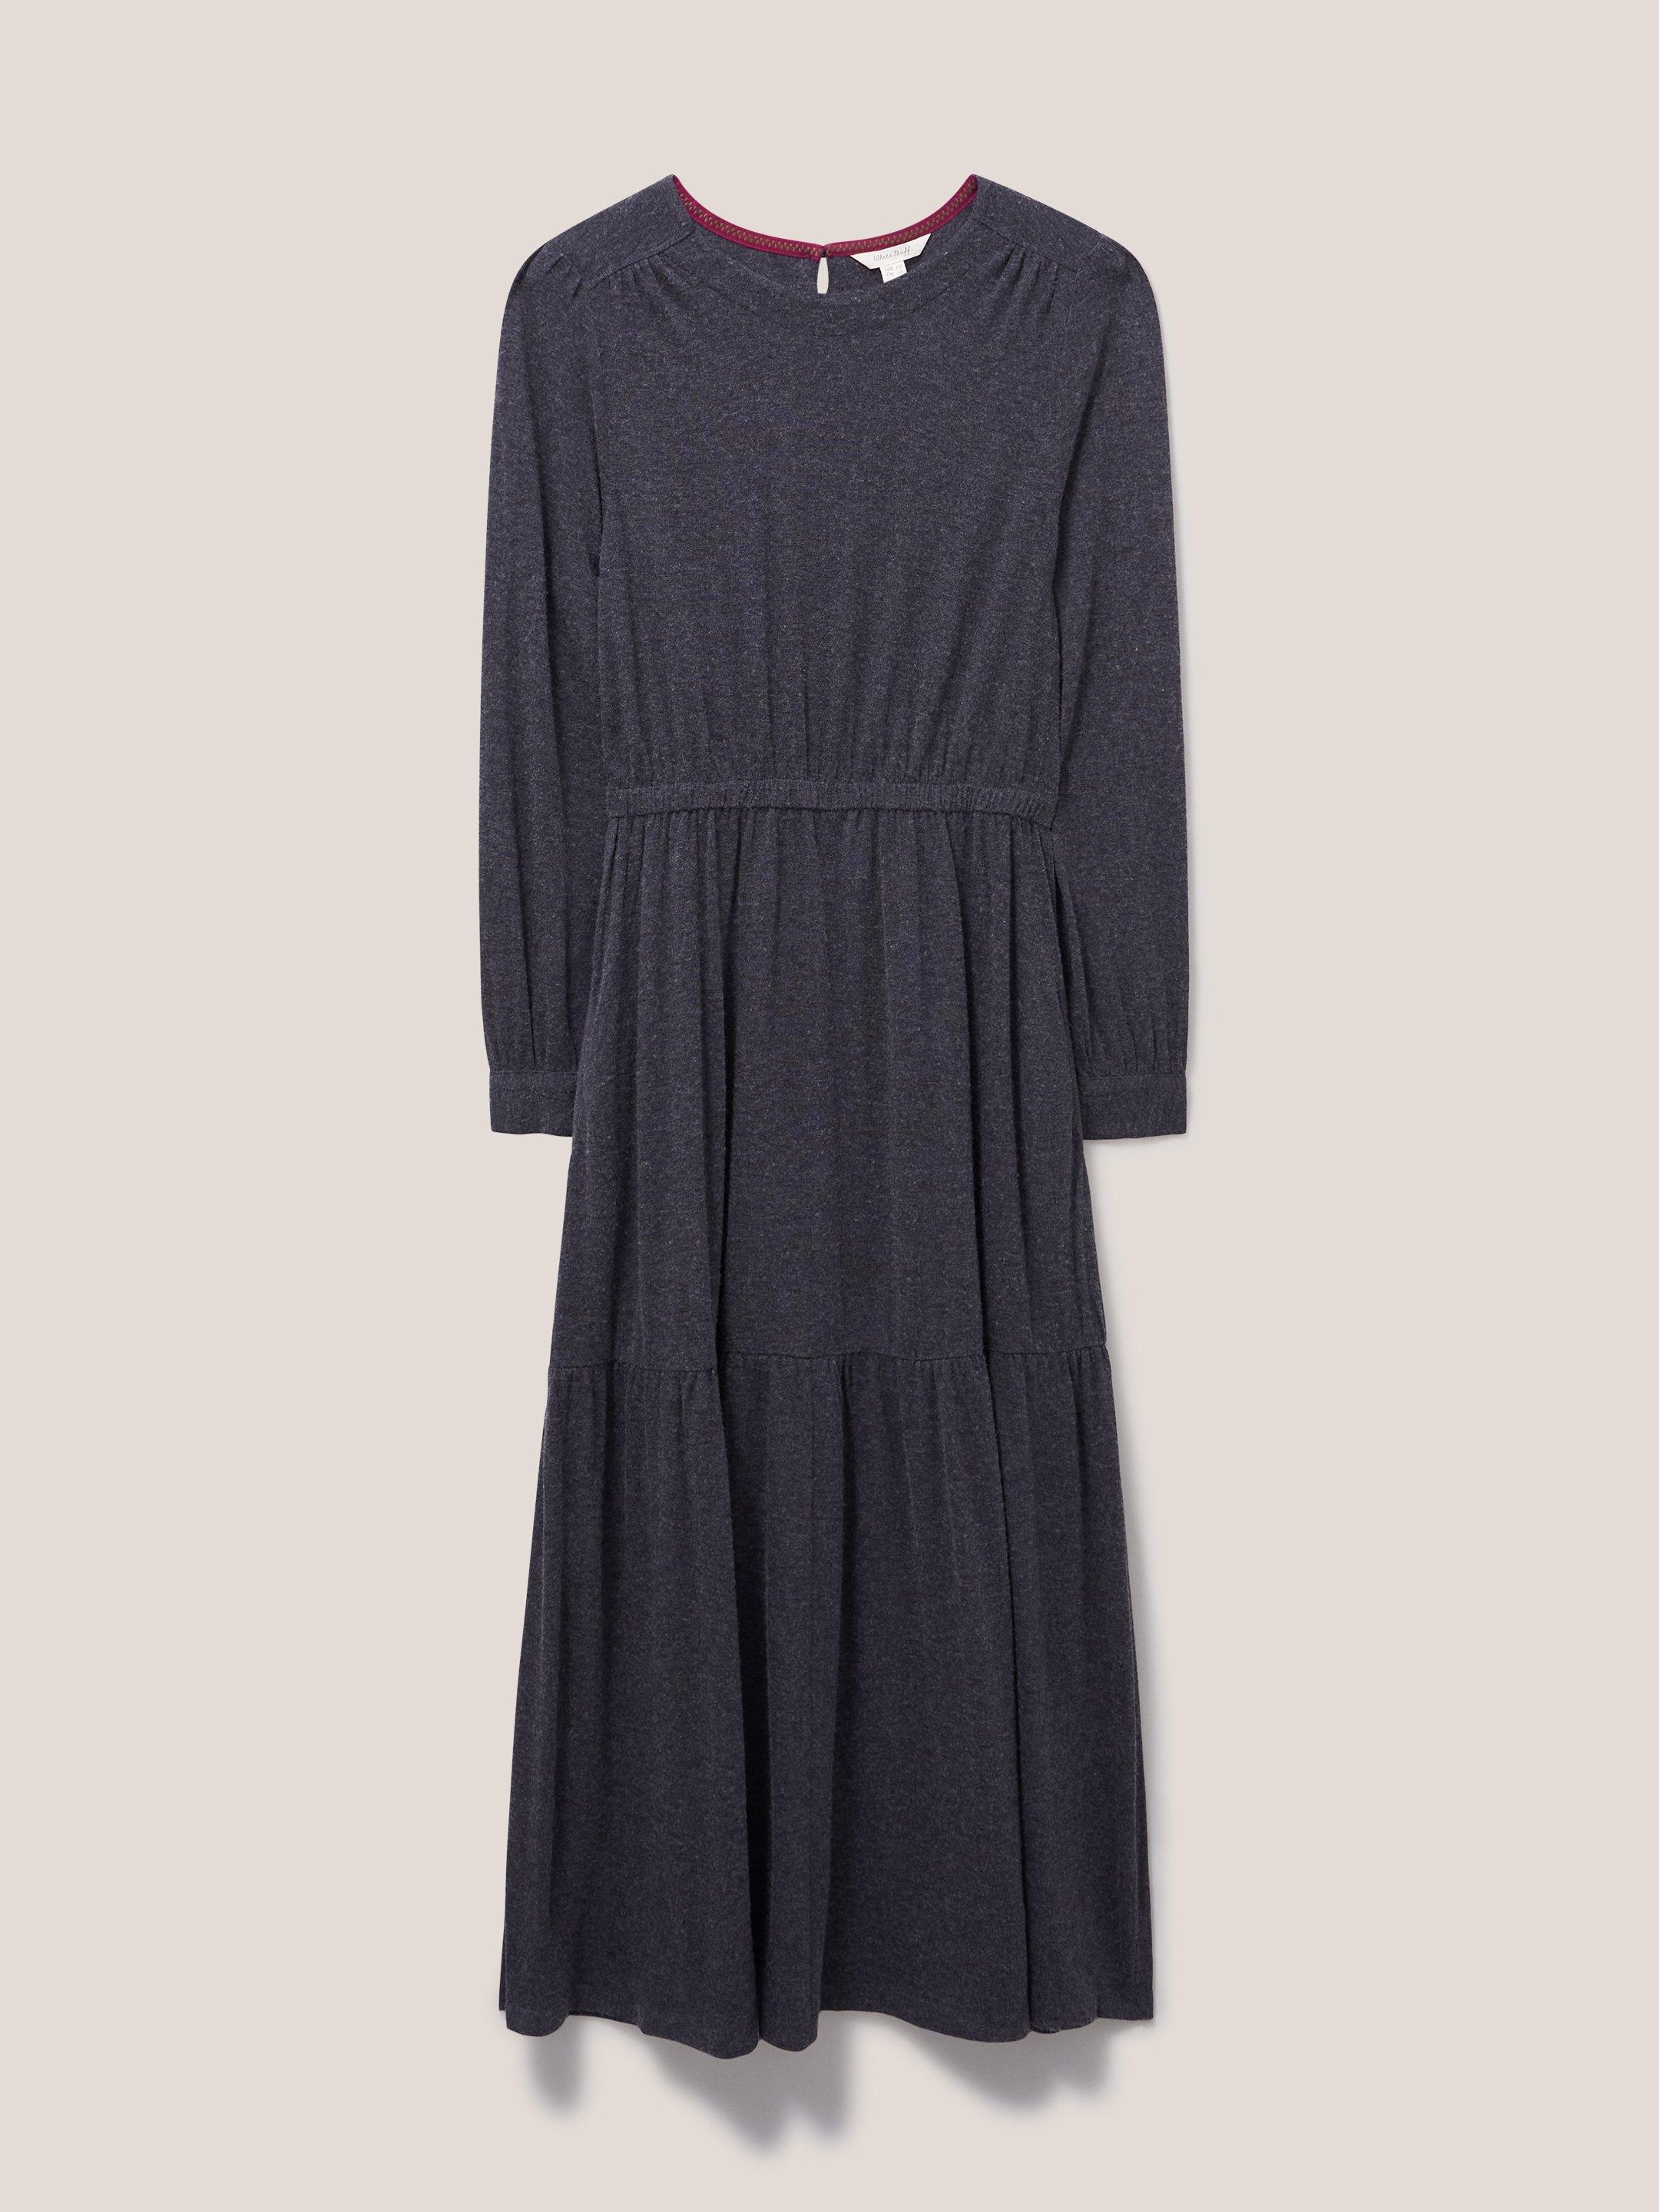 Olive Wool Mix Jersey Dress in CHARC GREY - FLAT FRONT